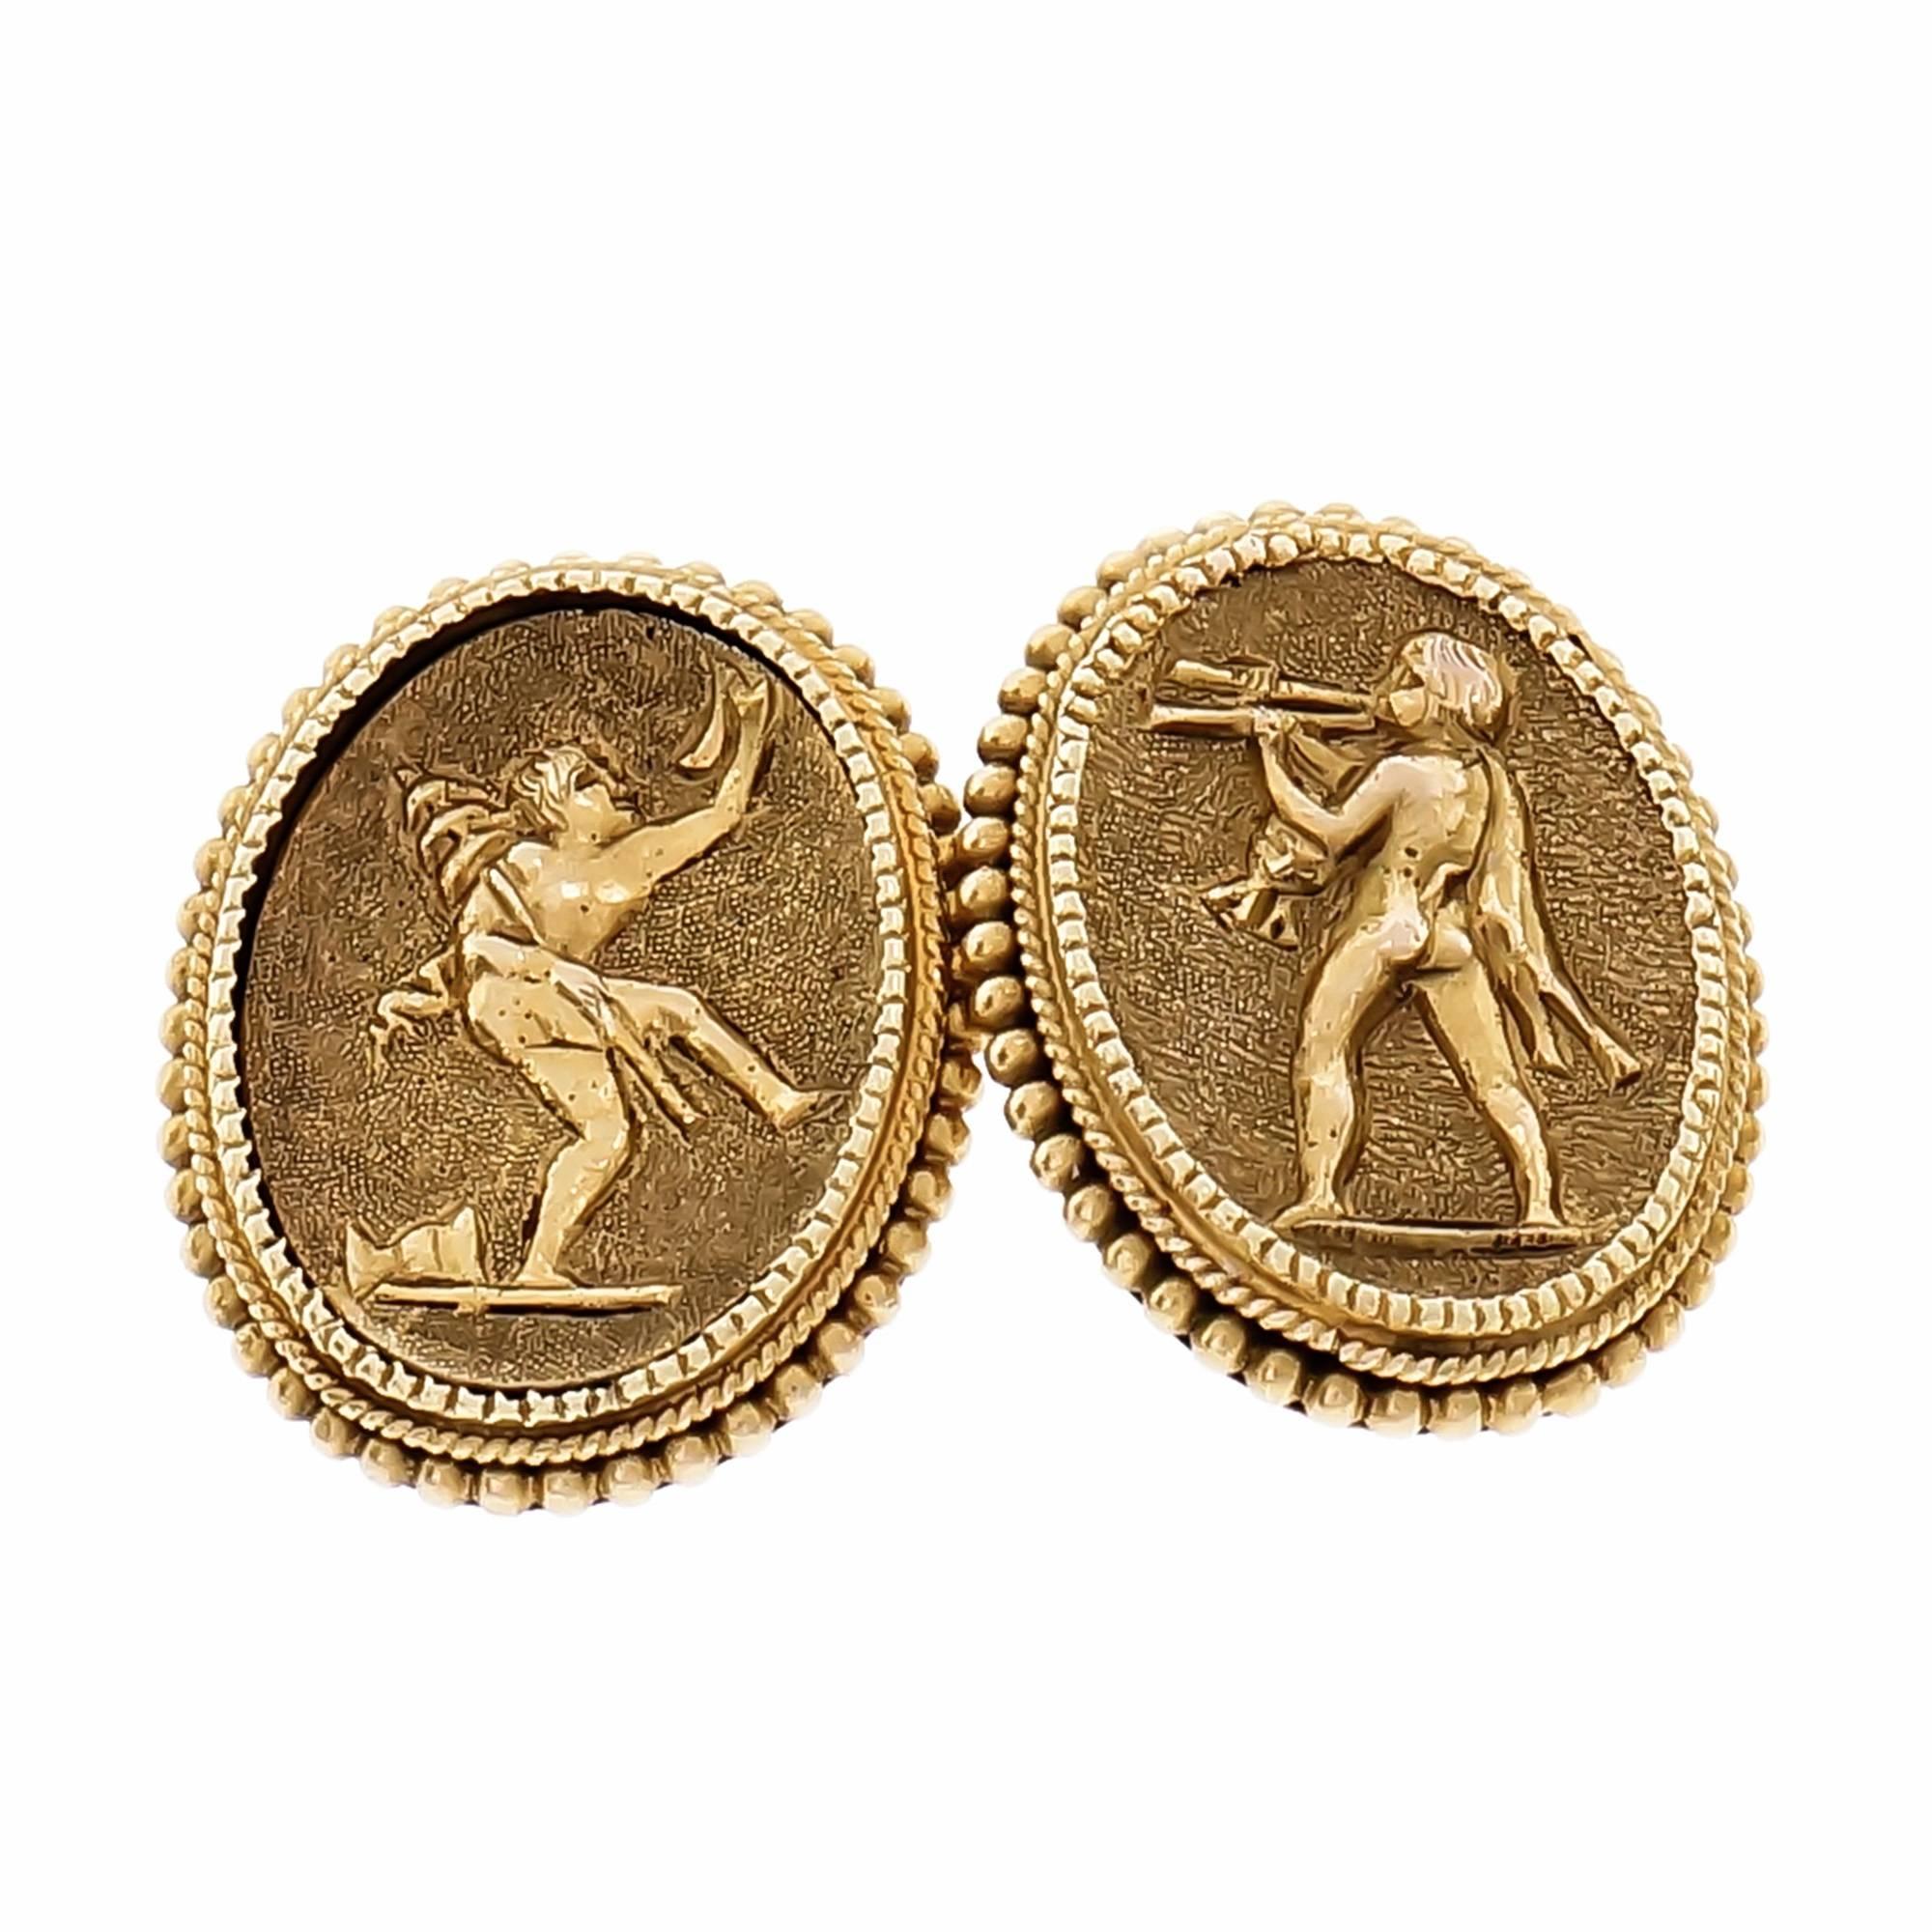 Vintage 1930s handmade Cufflinks. Engraved on both sides front and back 18k yellow gold, Etruscan Revival.

18k yellow gold
Tested and stamped: 18k
16.6 grams
Top to bottom: 17.26mm or .68 inch
Width: 13.9mm or .55 inch
Depth: 4.23mm

